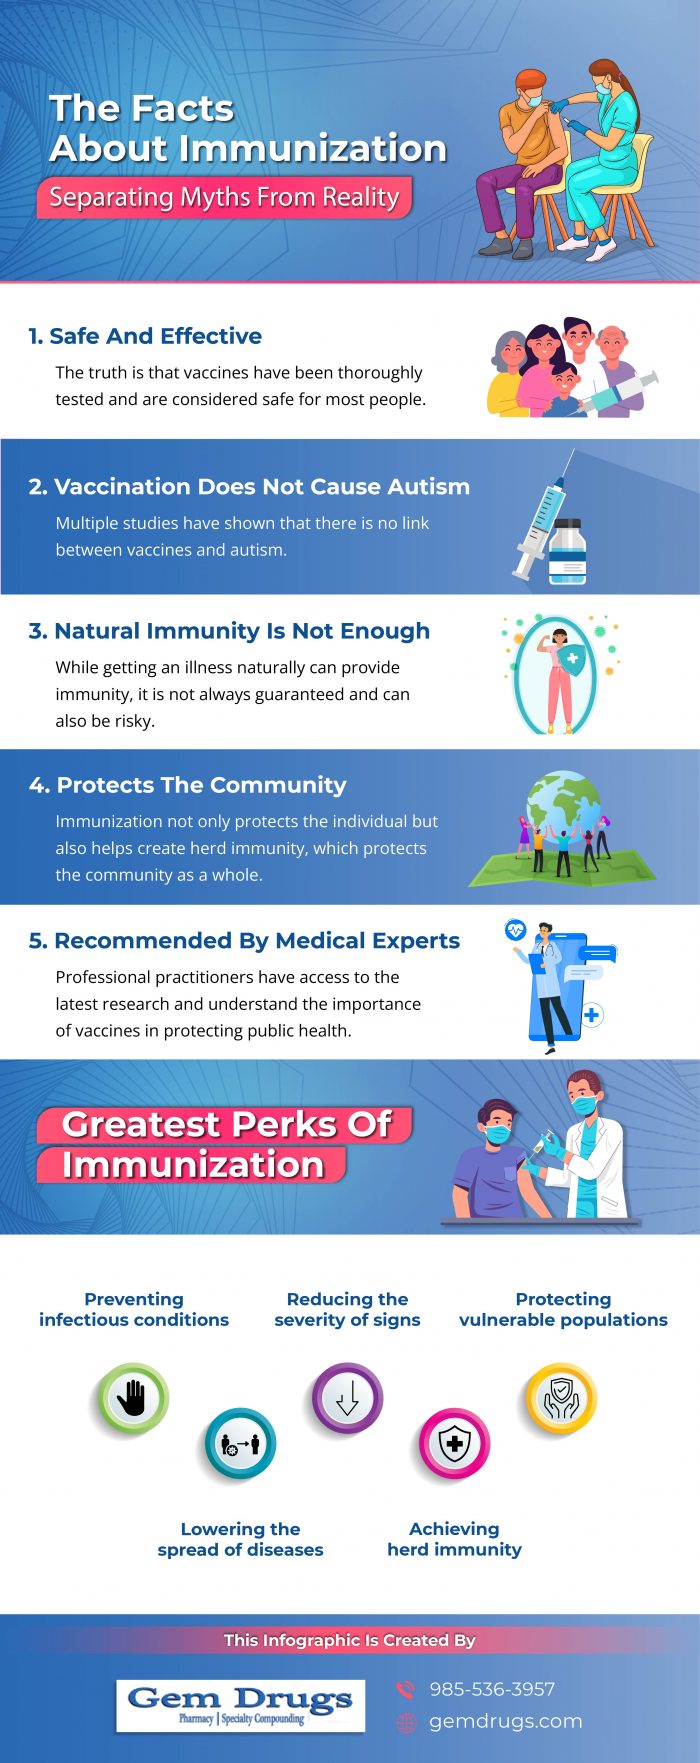 Get The Perfect Immunization With Experts